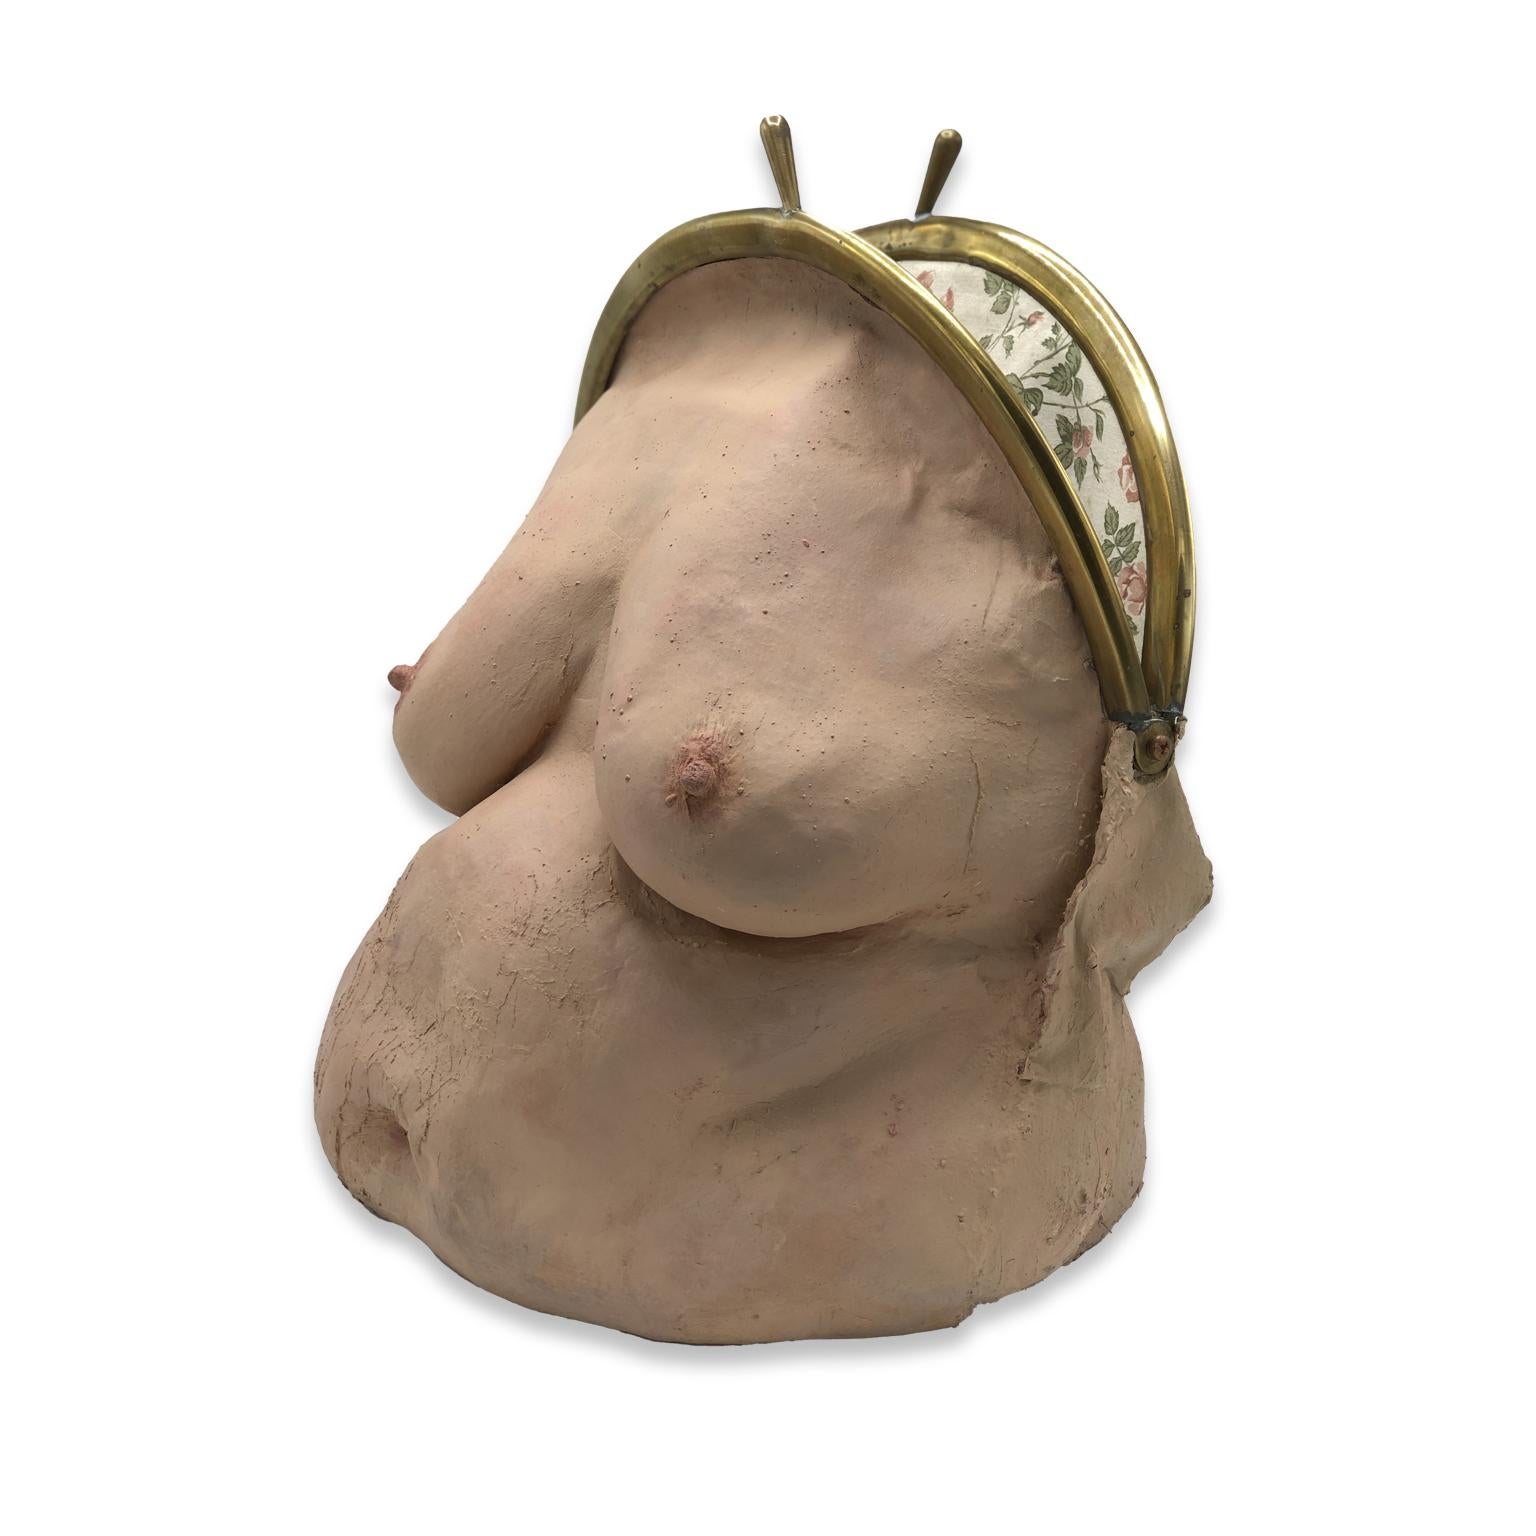 Nude Female Figurative Latex Contemporary Object - Breast Bag IV - Sculpture by Miriam Meulepas